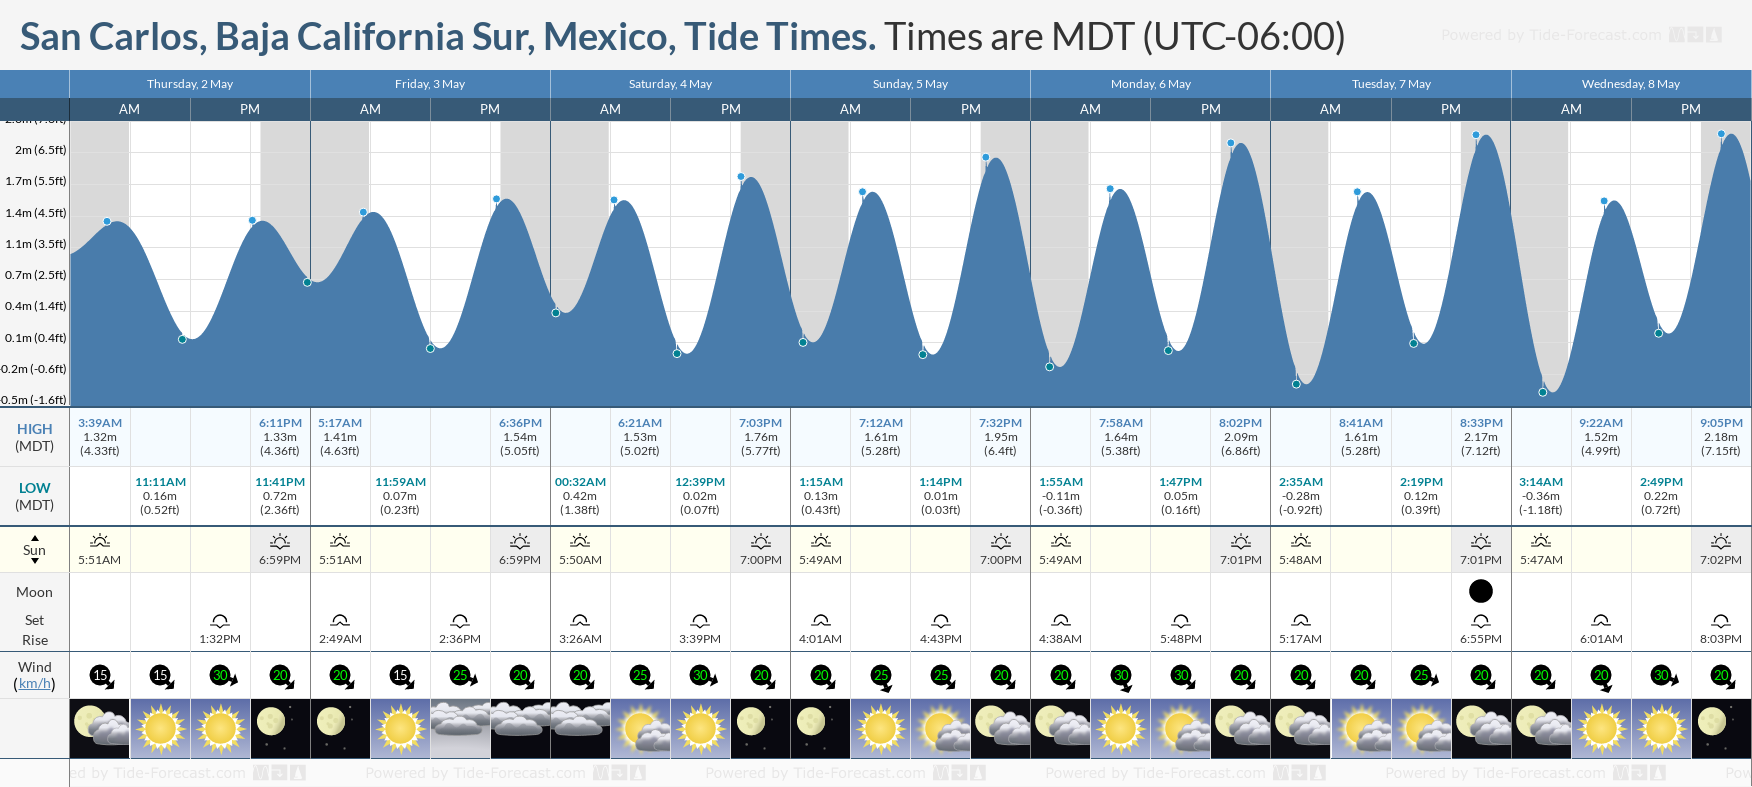 San Carlos, Baja California Sur, Mexico Tide Chart including high and low tide tide times for the next 7 days